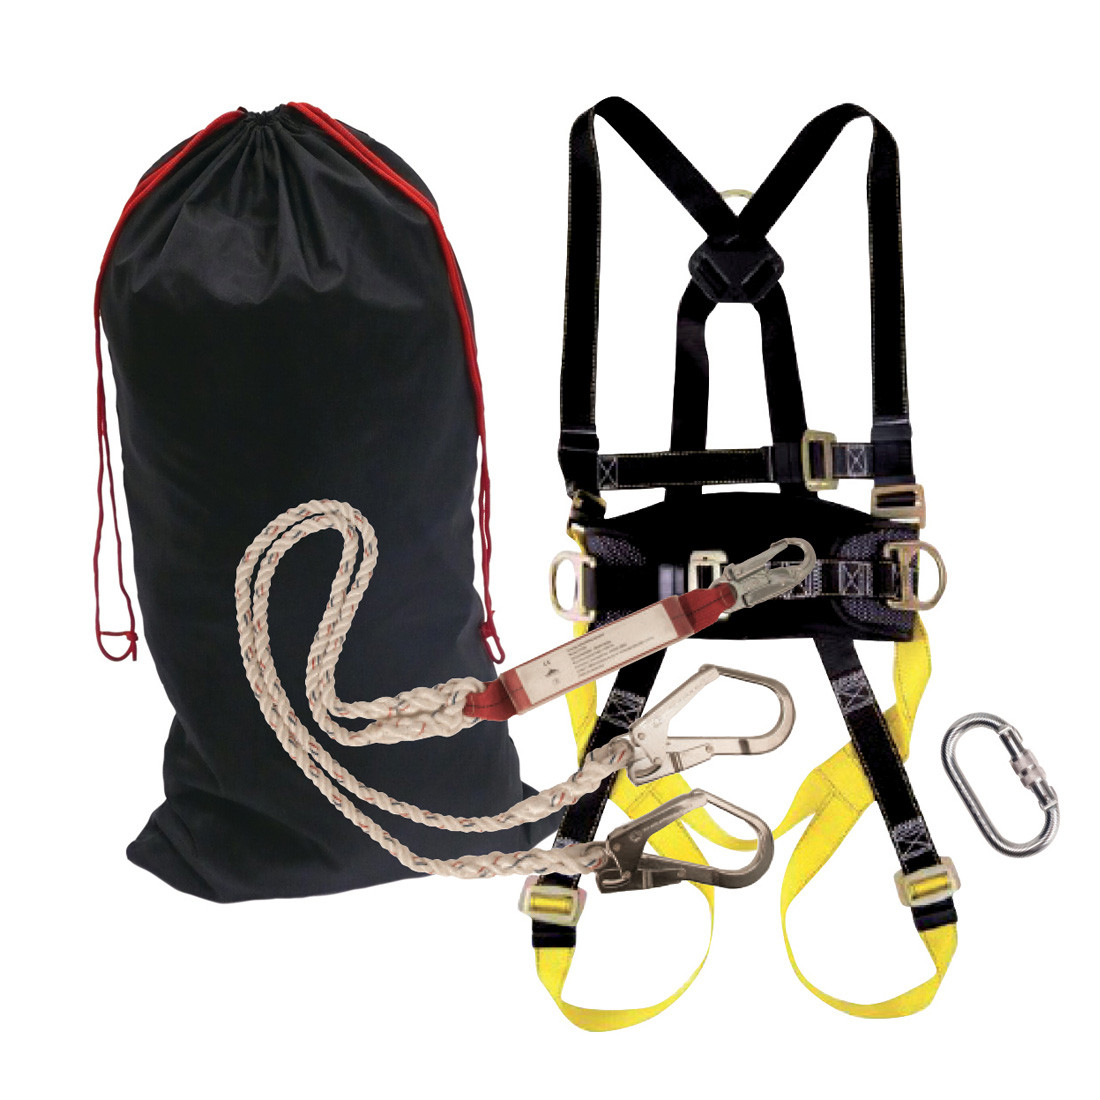 Scaffolding Kit - Personal protection